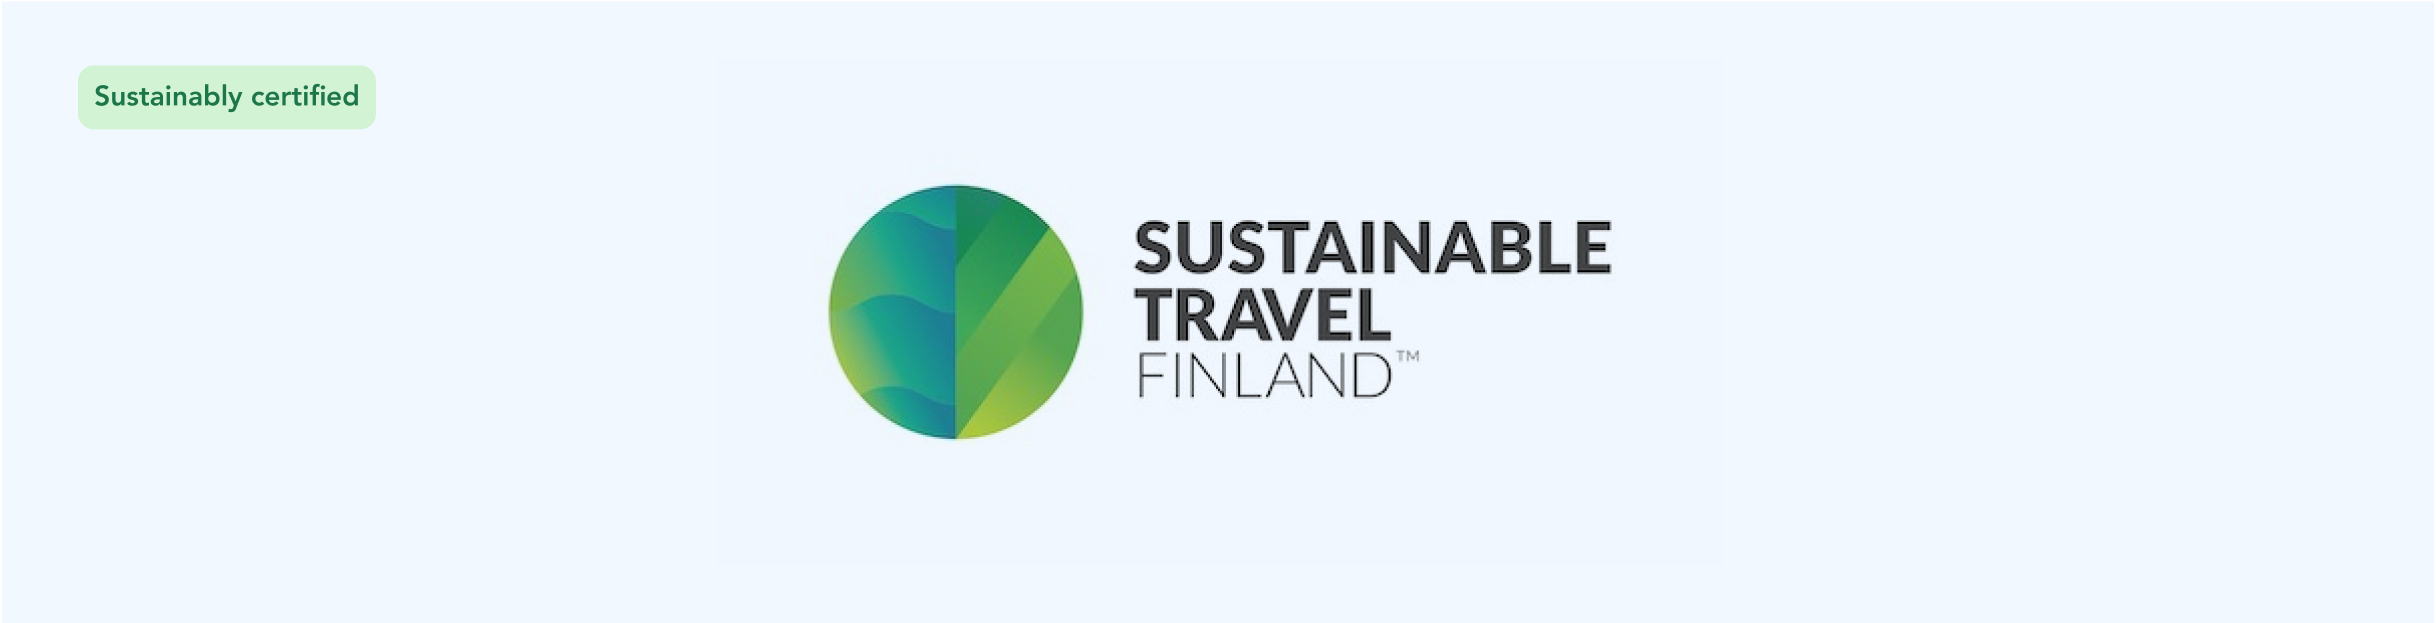 Sustainable Travel Finland のロゴ